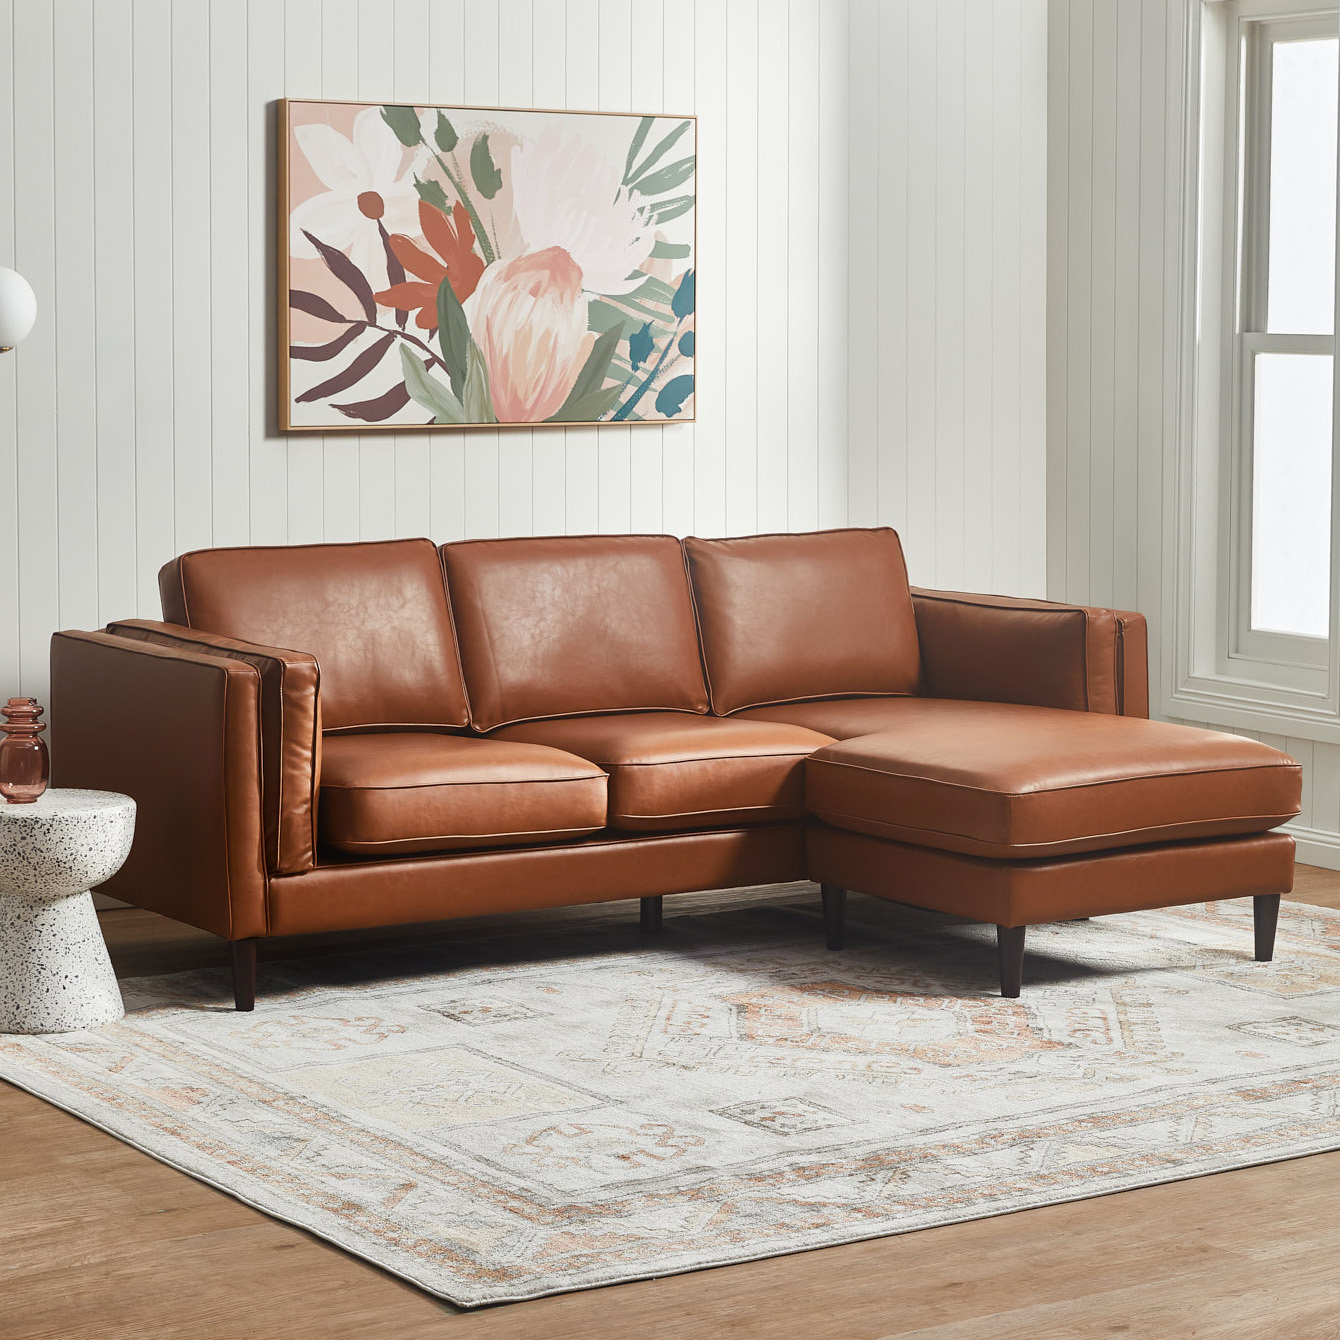 Temple & Webster Brahm Premium 3 Seater Sofa with Reversible Chaise